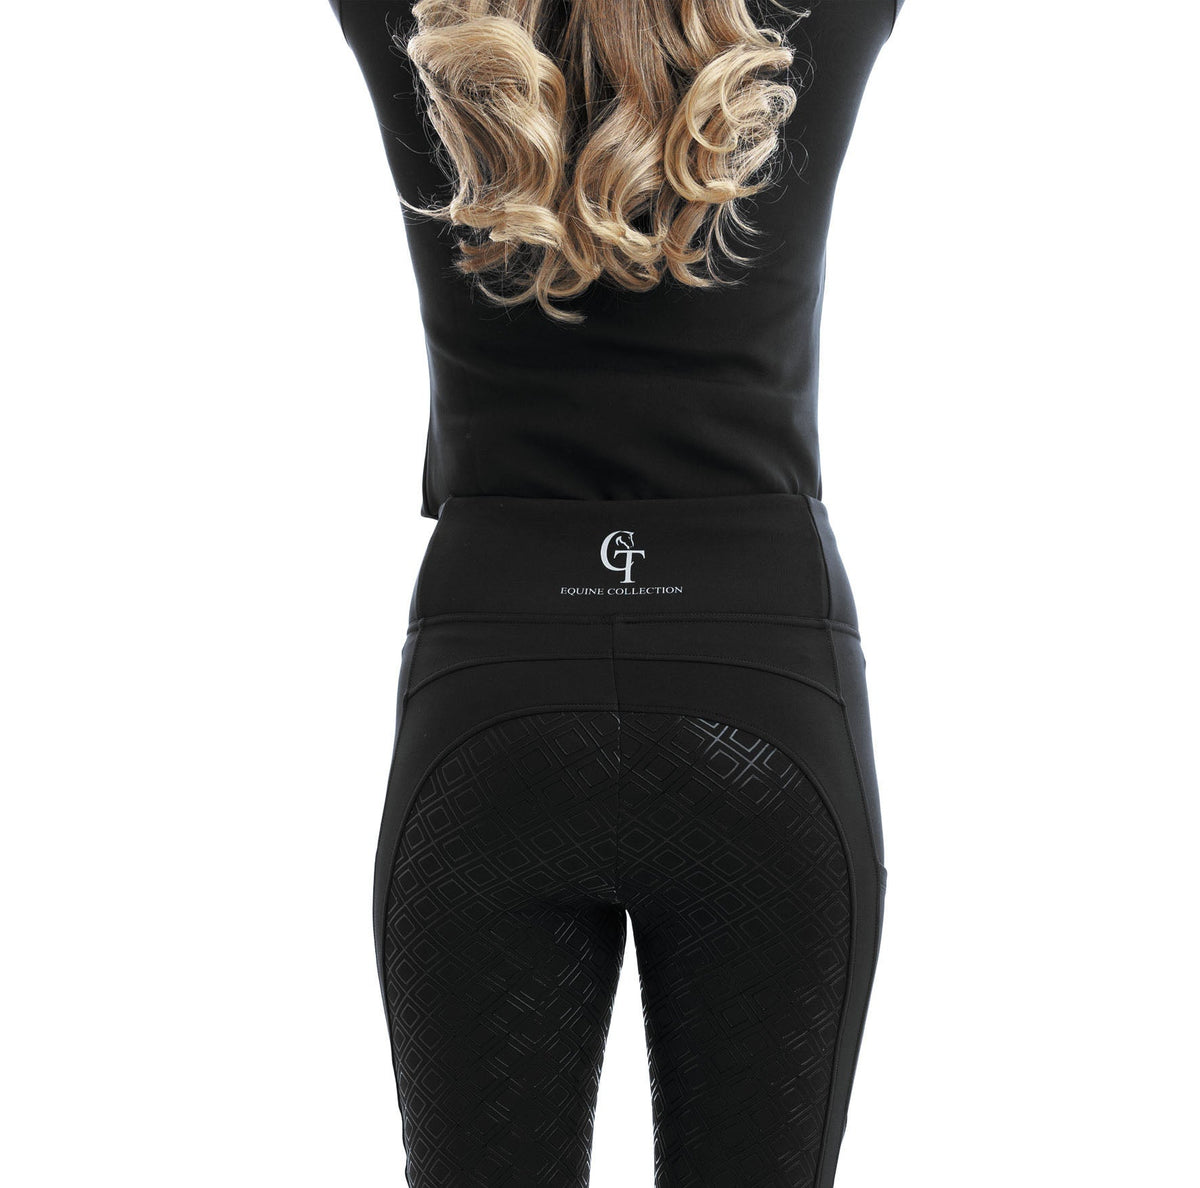 Winter Thermal ON SALE - Riding Leggings and Base Layer - CT